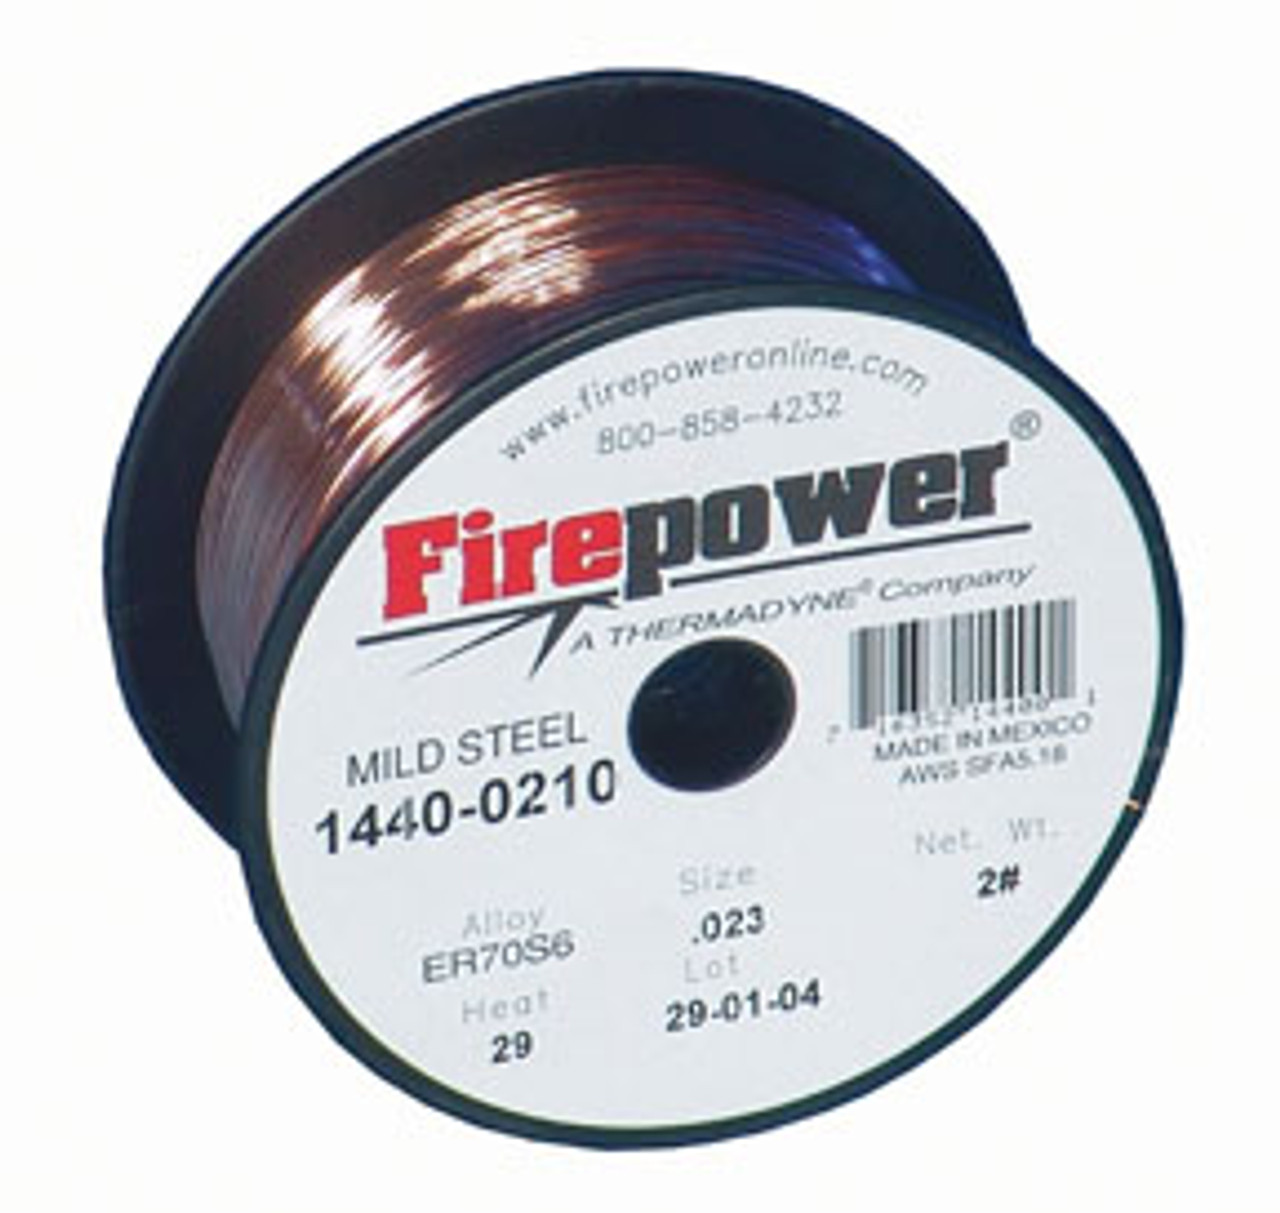 FIREPOWER .023" Solid MIG Wire VCT-1440-0210